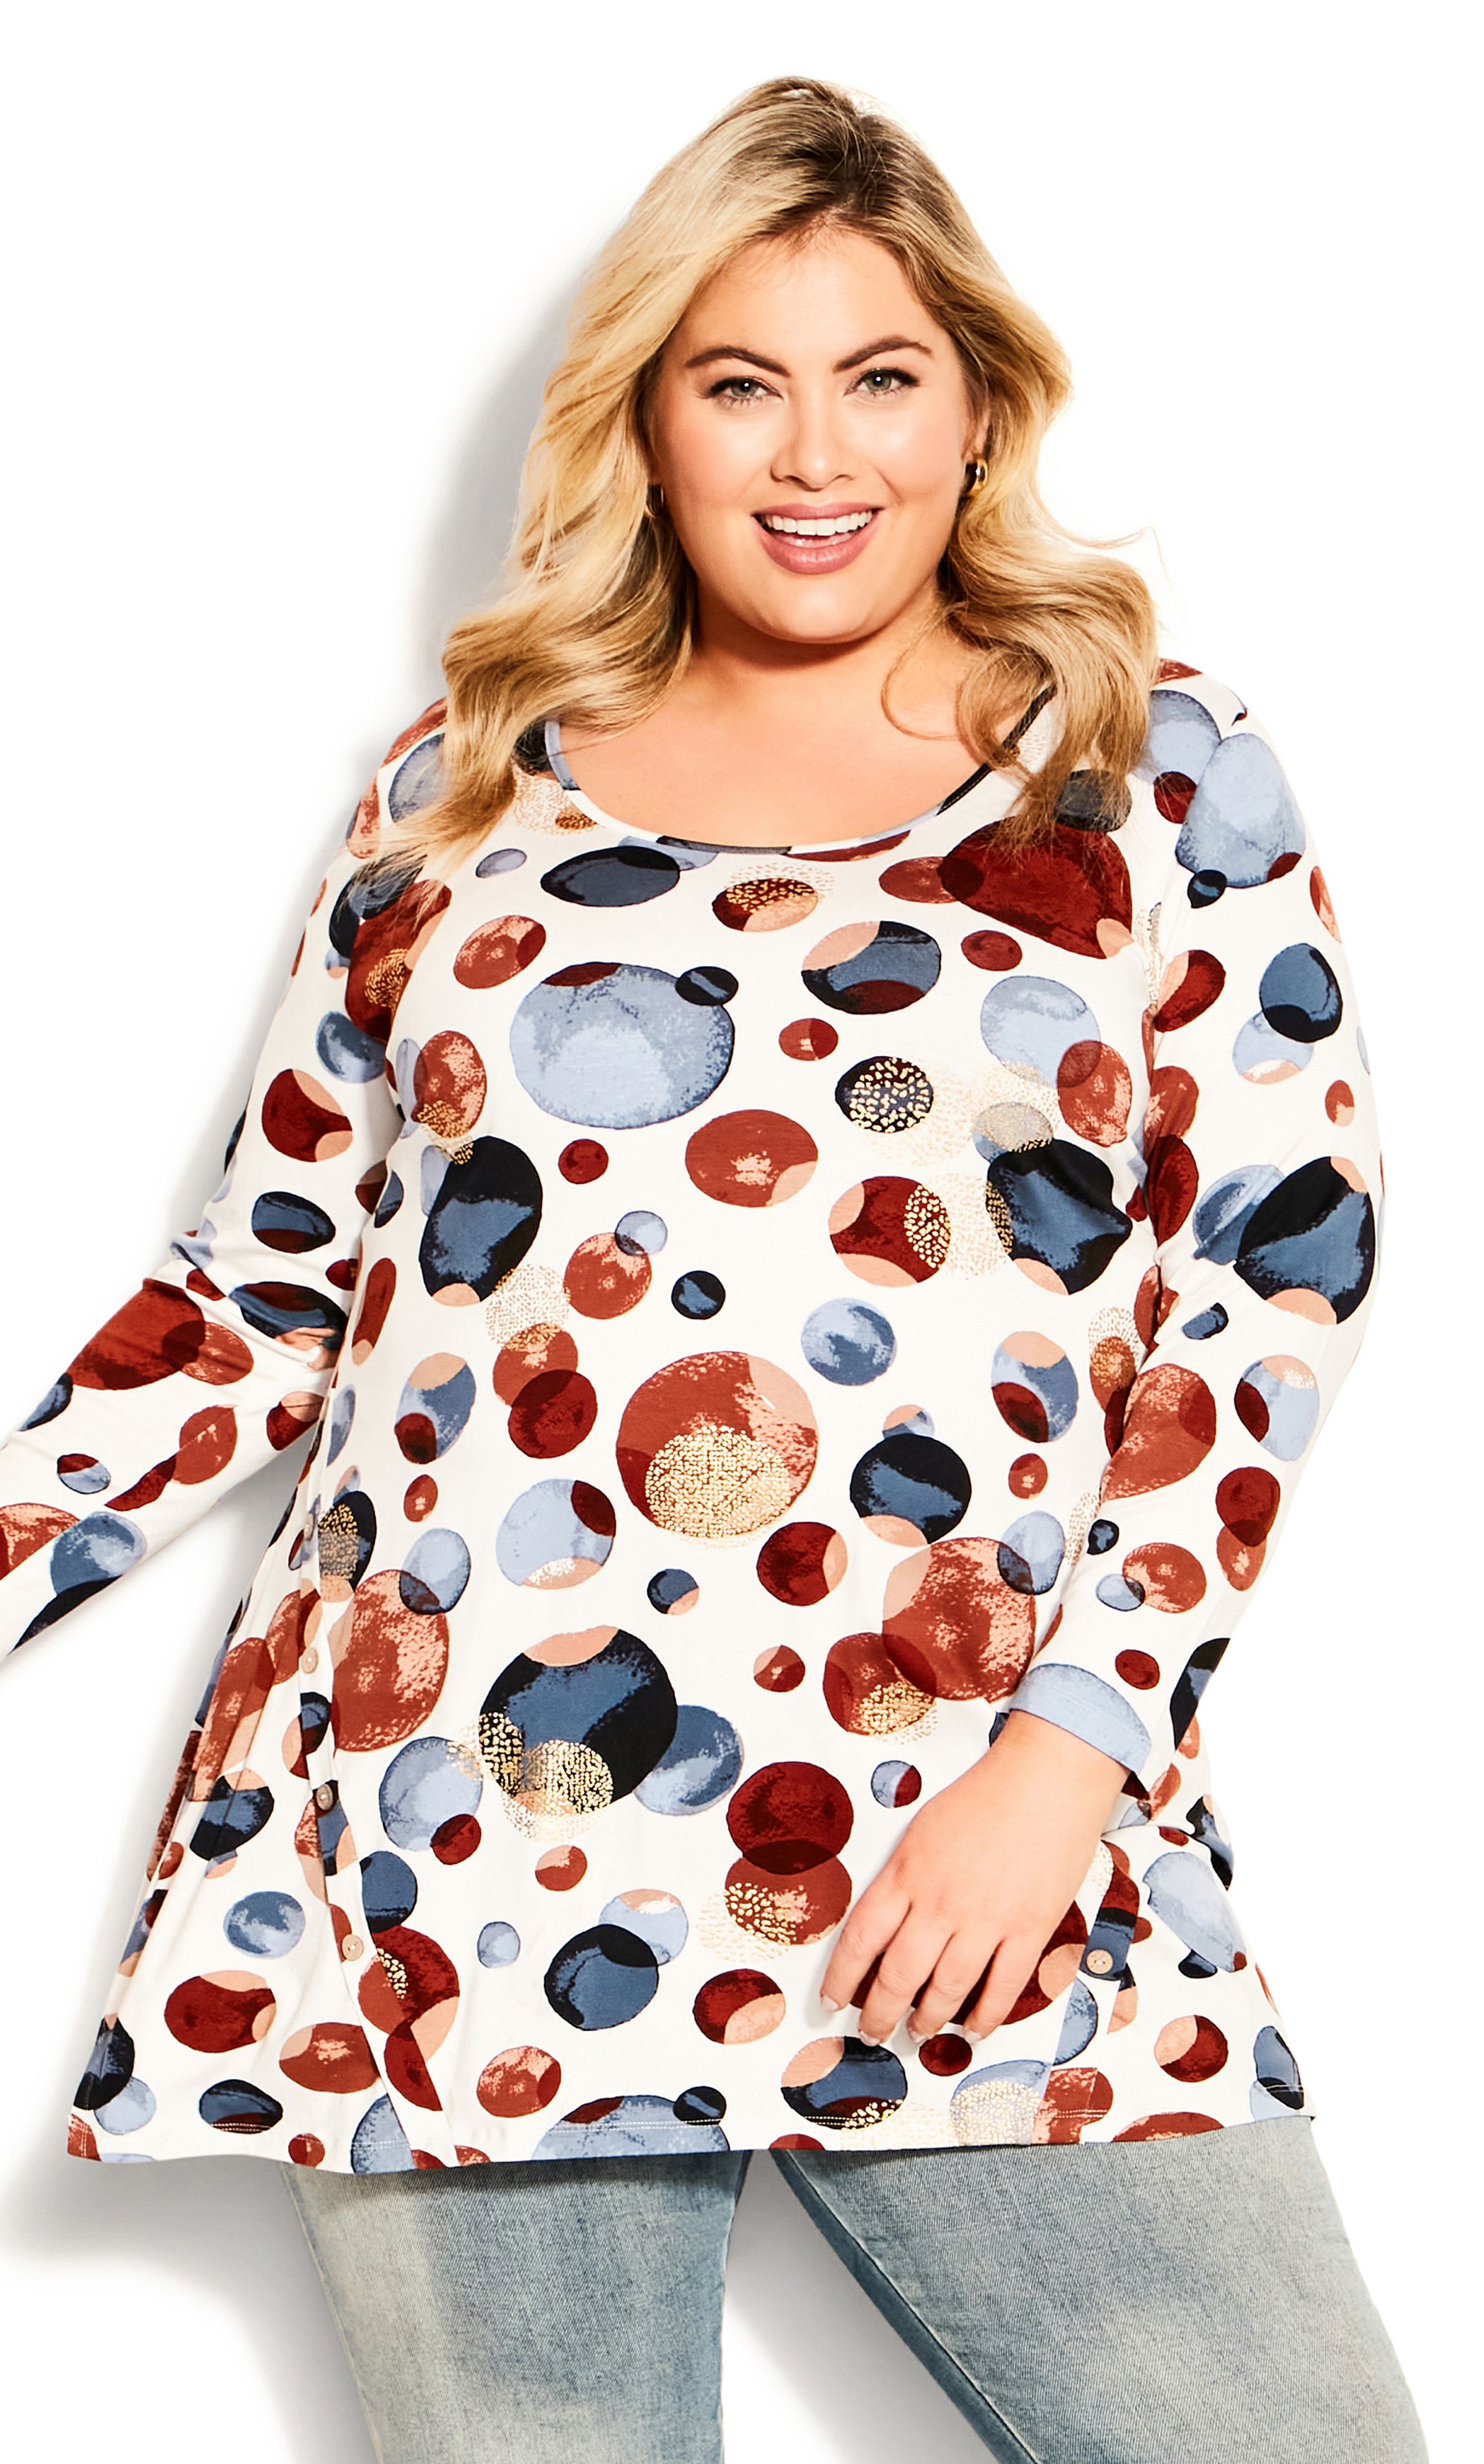 Make styling easy with our Leisure Button Tunic. Crafted in a soft stretch fabrication that complements your curves, the ivory hue can be paired with everything in your wardrobe! Key Features Include: - Scoop neckline - 3/4 length sleeves - Relaxed fit - All-over print - Asymmetrical button detailing - Stretch fabrication Keep it simple with black leggings and sandals.